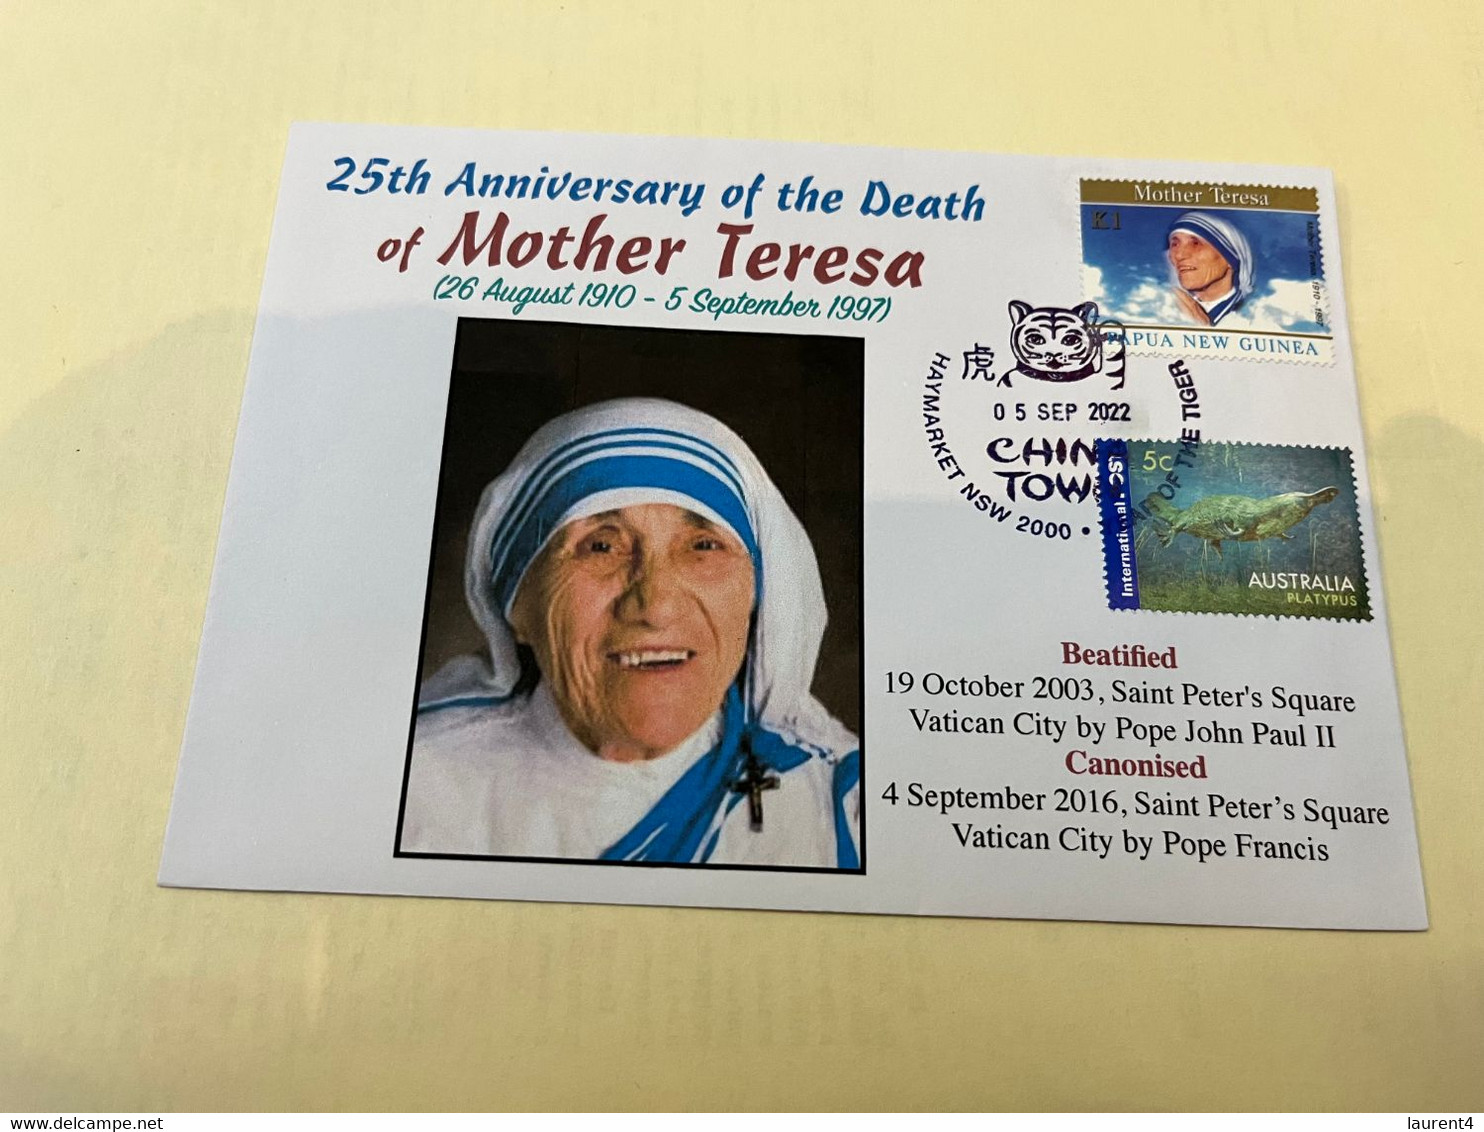 (2 J 44) 25th Anniversary Of The Death Of Mother Teresa In India On 5 Sep. 1997 - Papua New Guinea M. Teresa Stamp - Madre Teresa